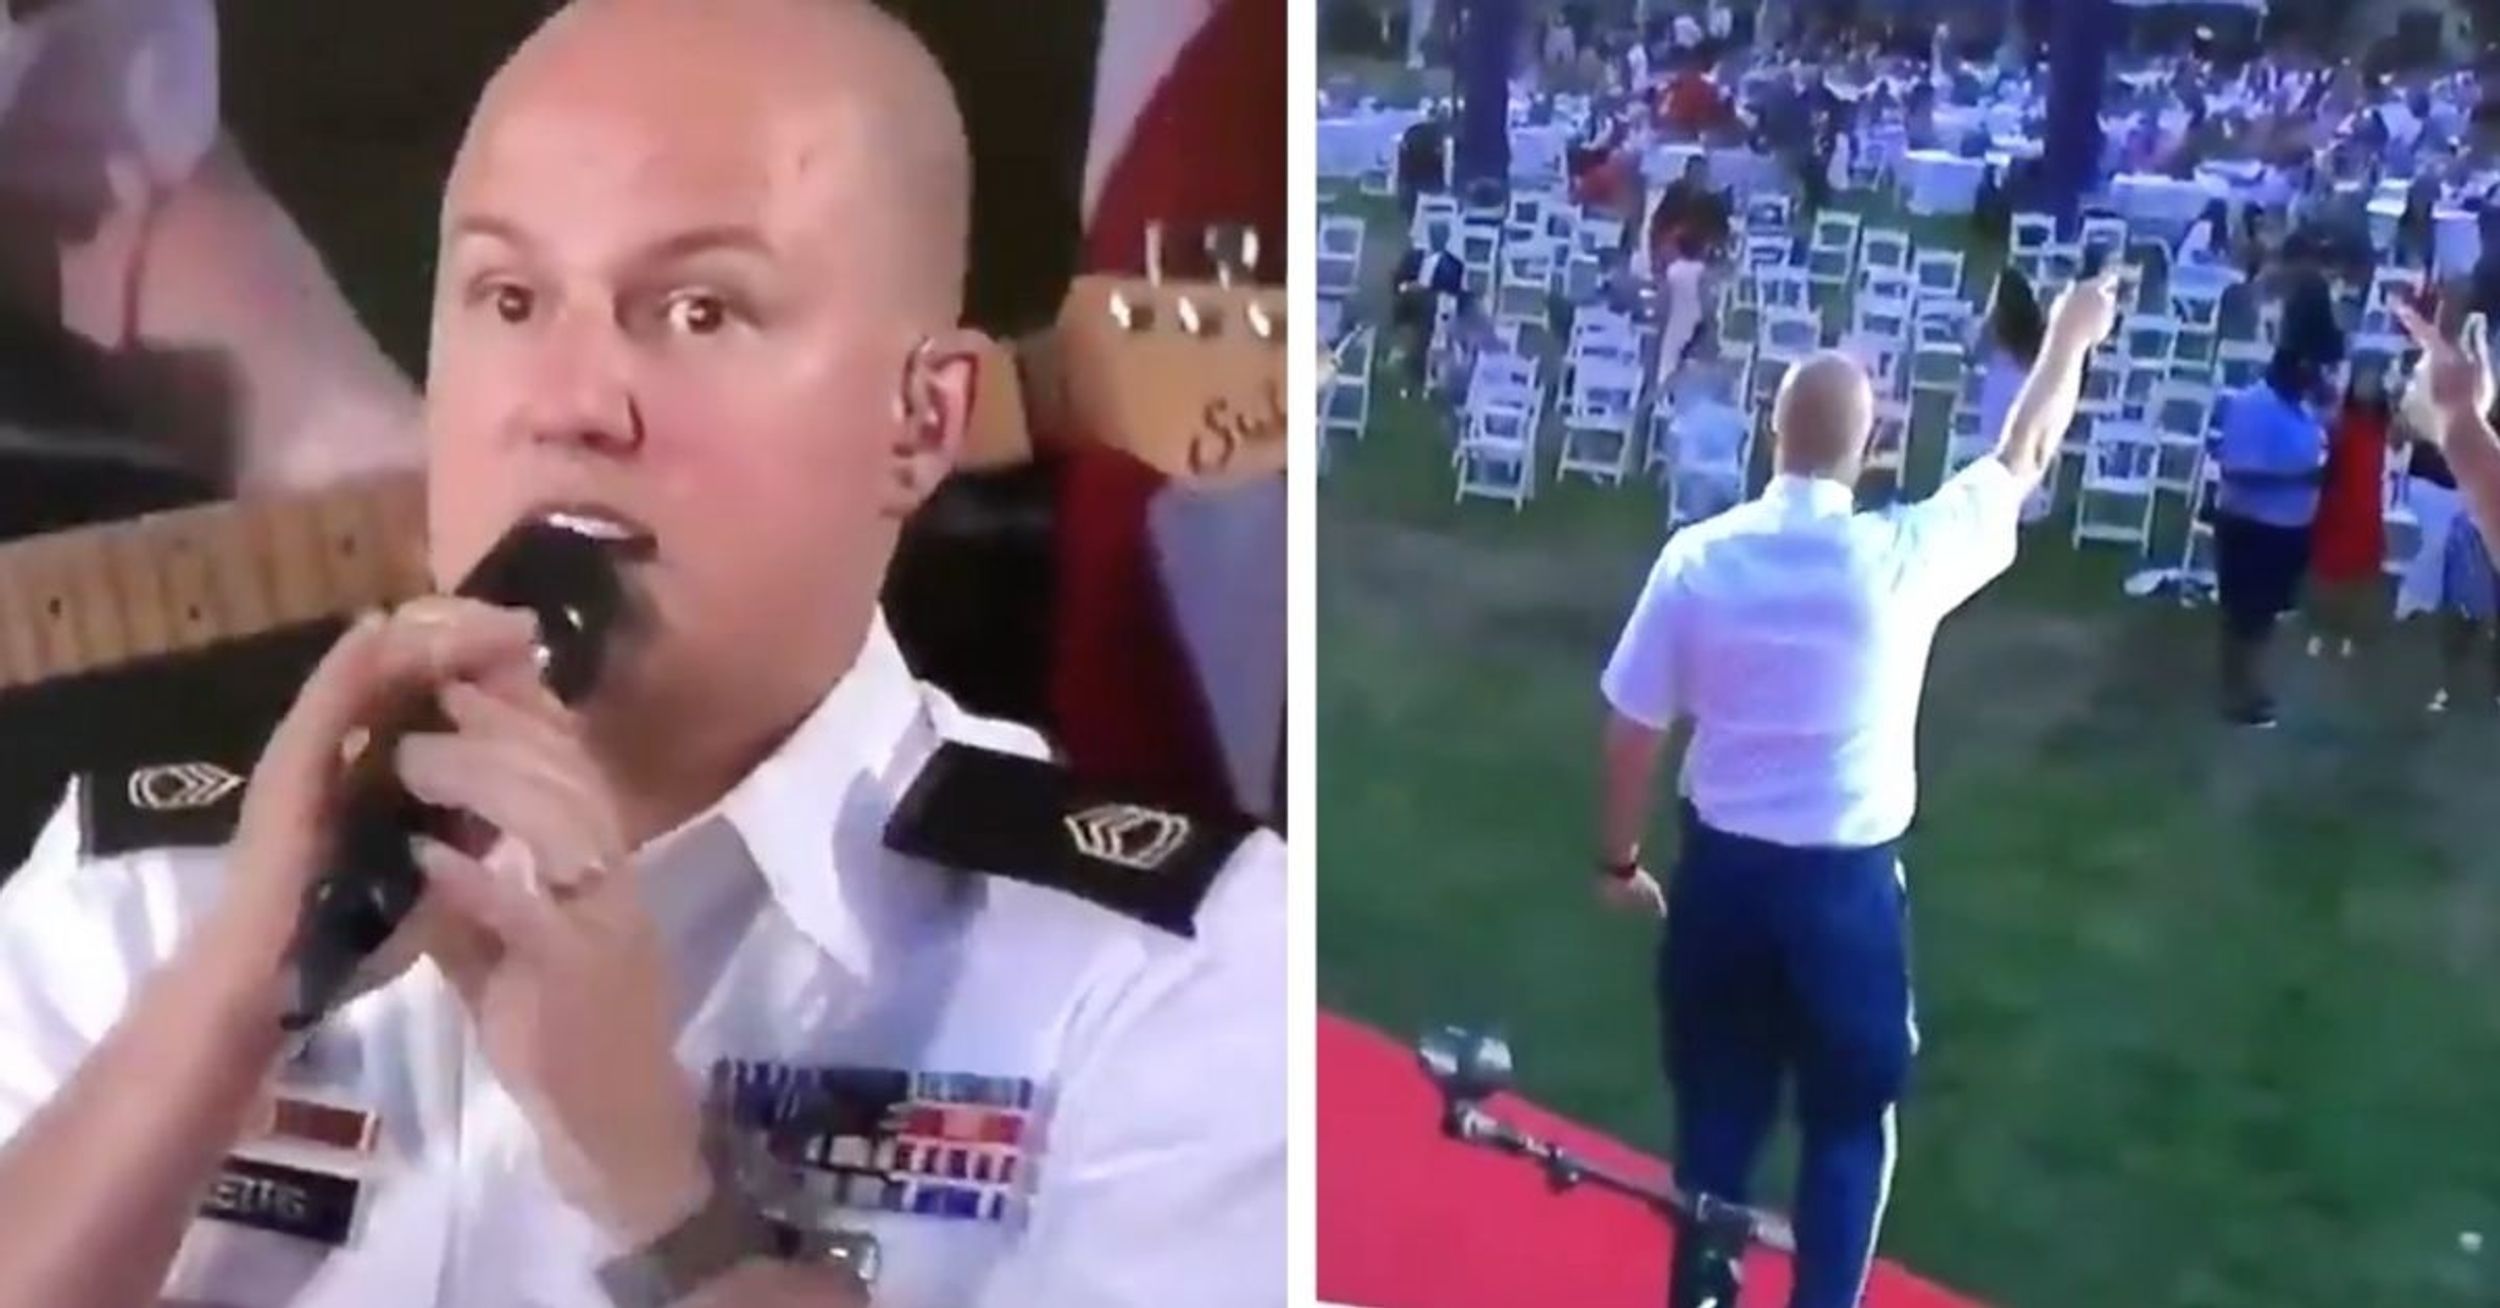 Guy Performing Bruno Mars To An Empty Crowd At Trump's July 4th Celebration Is Hilariously Awkward